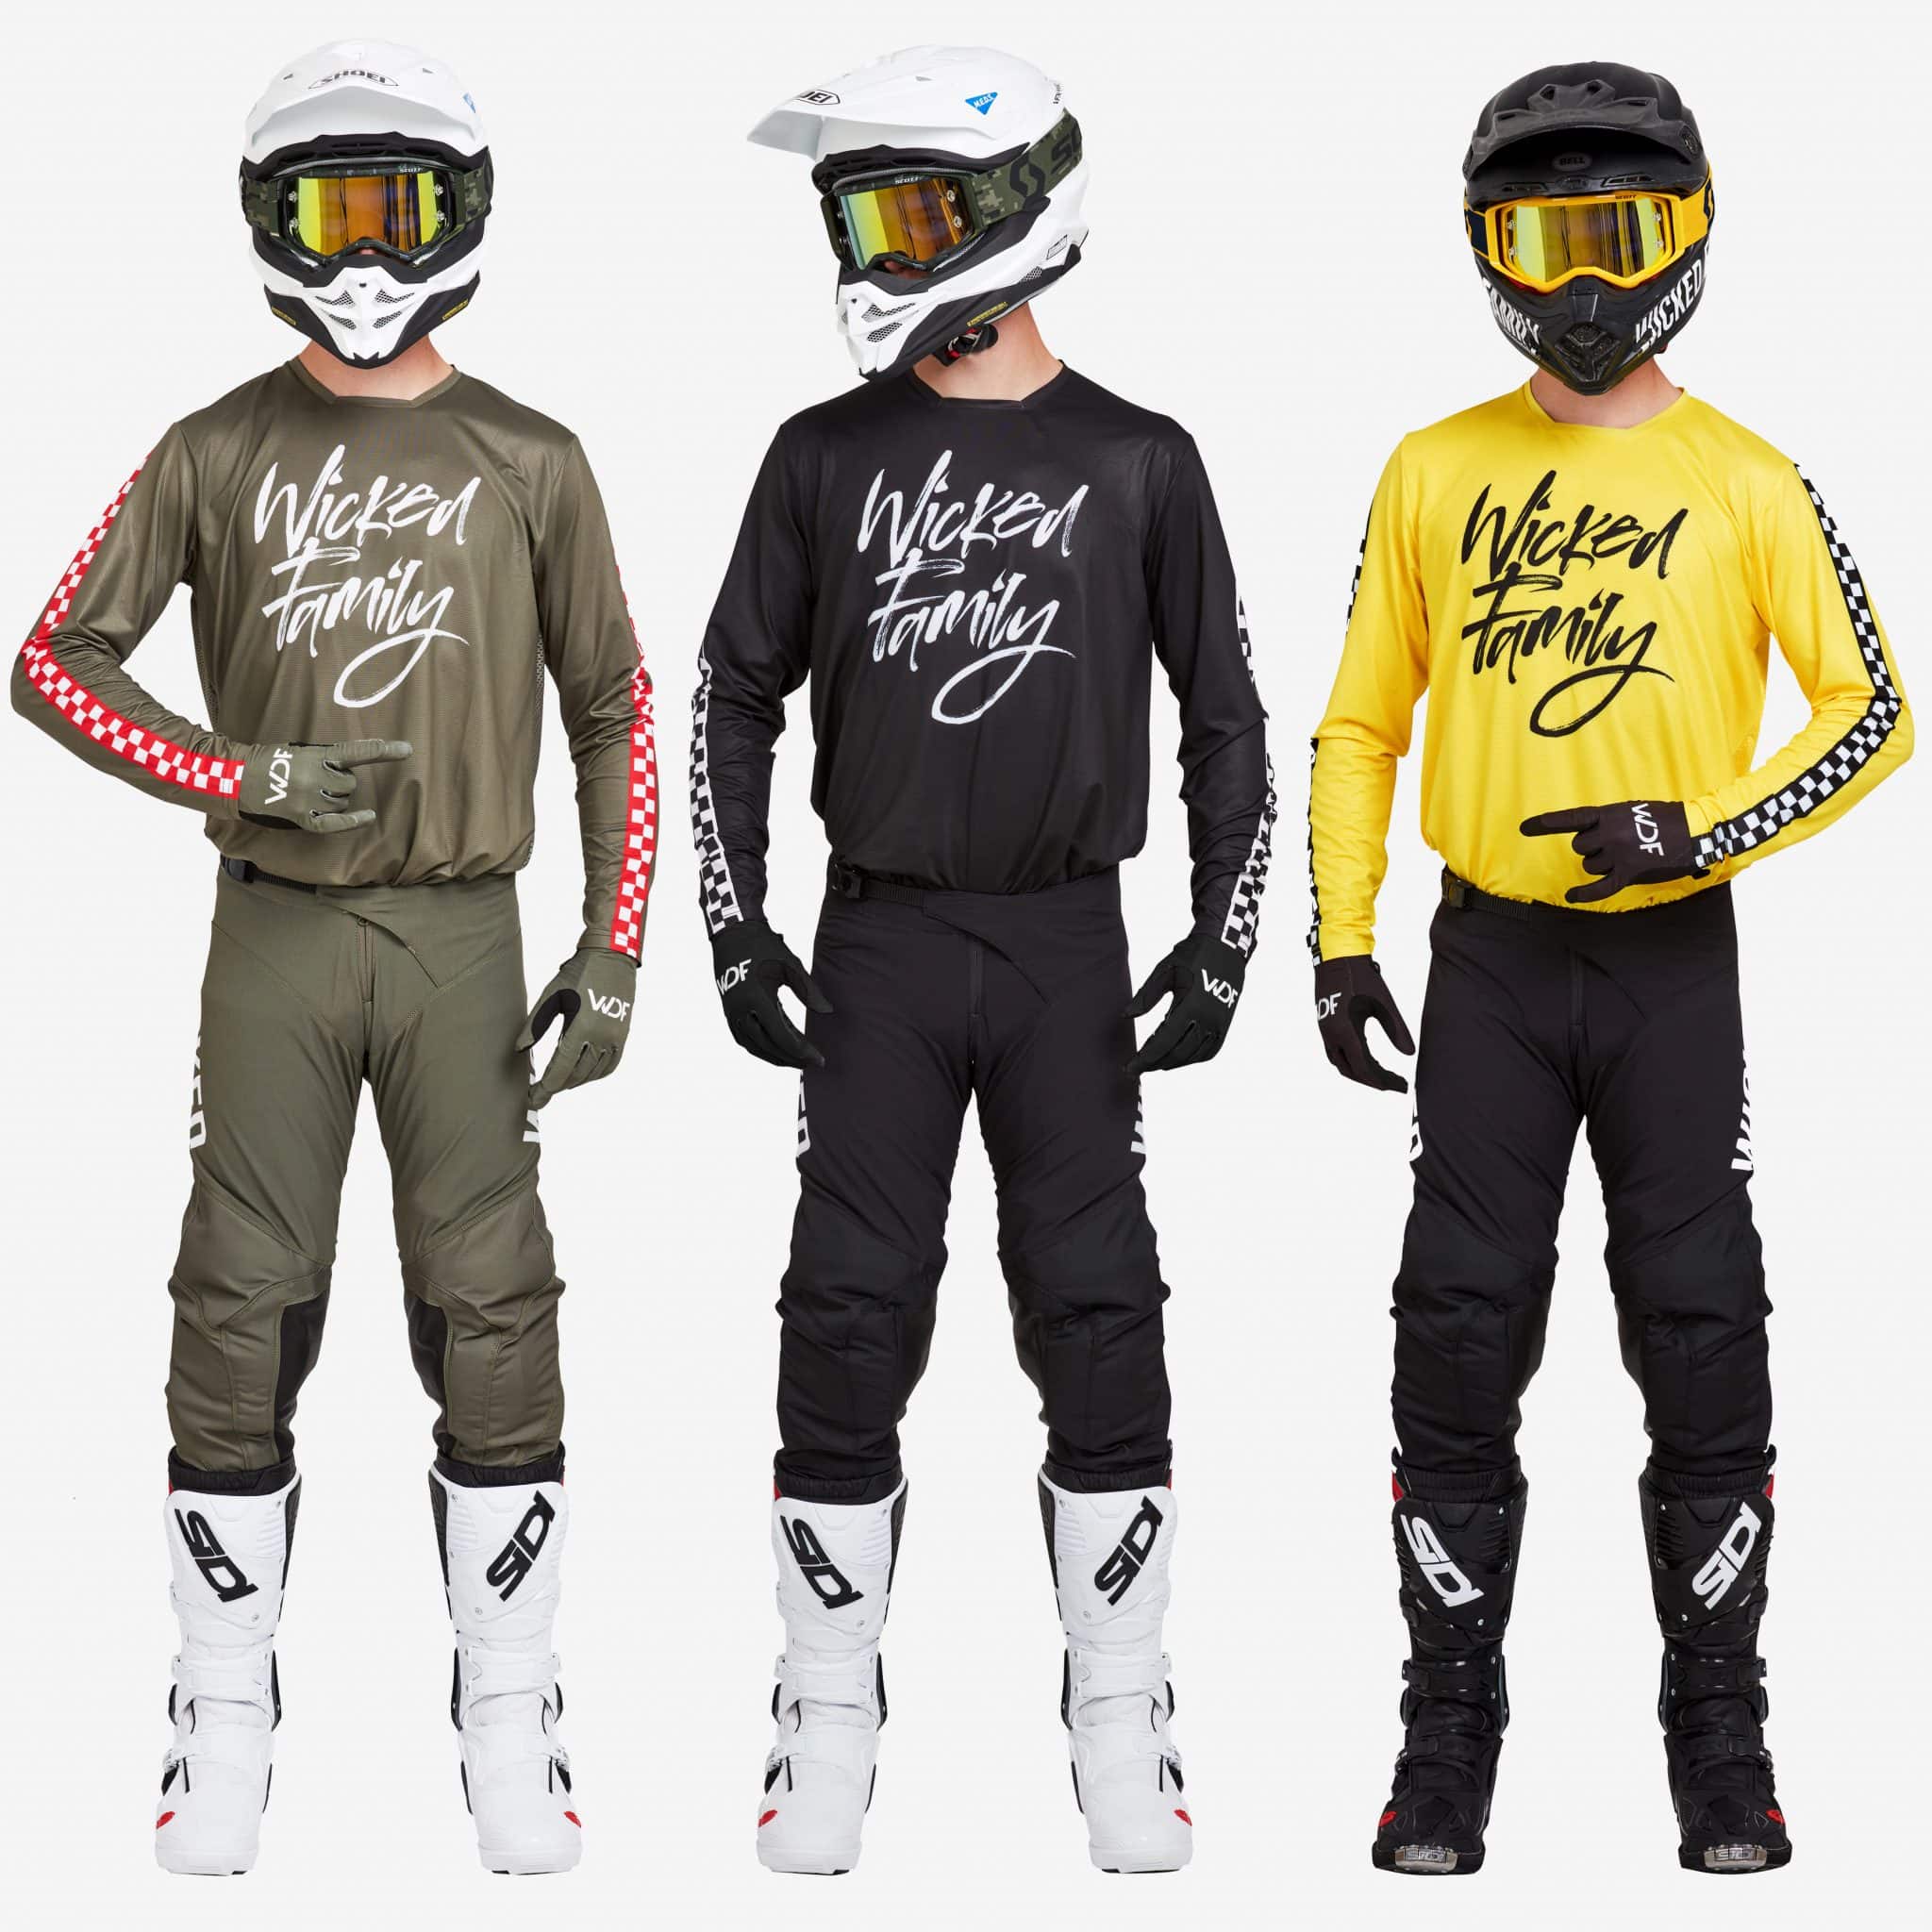 MX Jerseys - Get your Dirt Bike Riding Gear at Wicked Family!